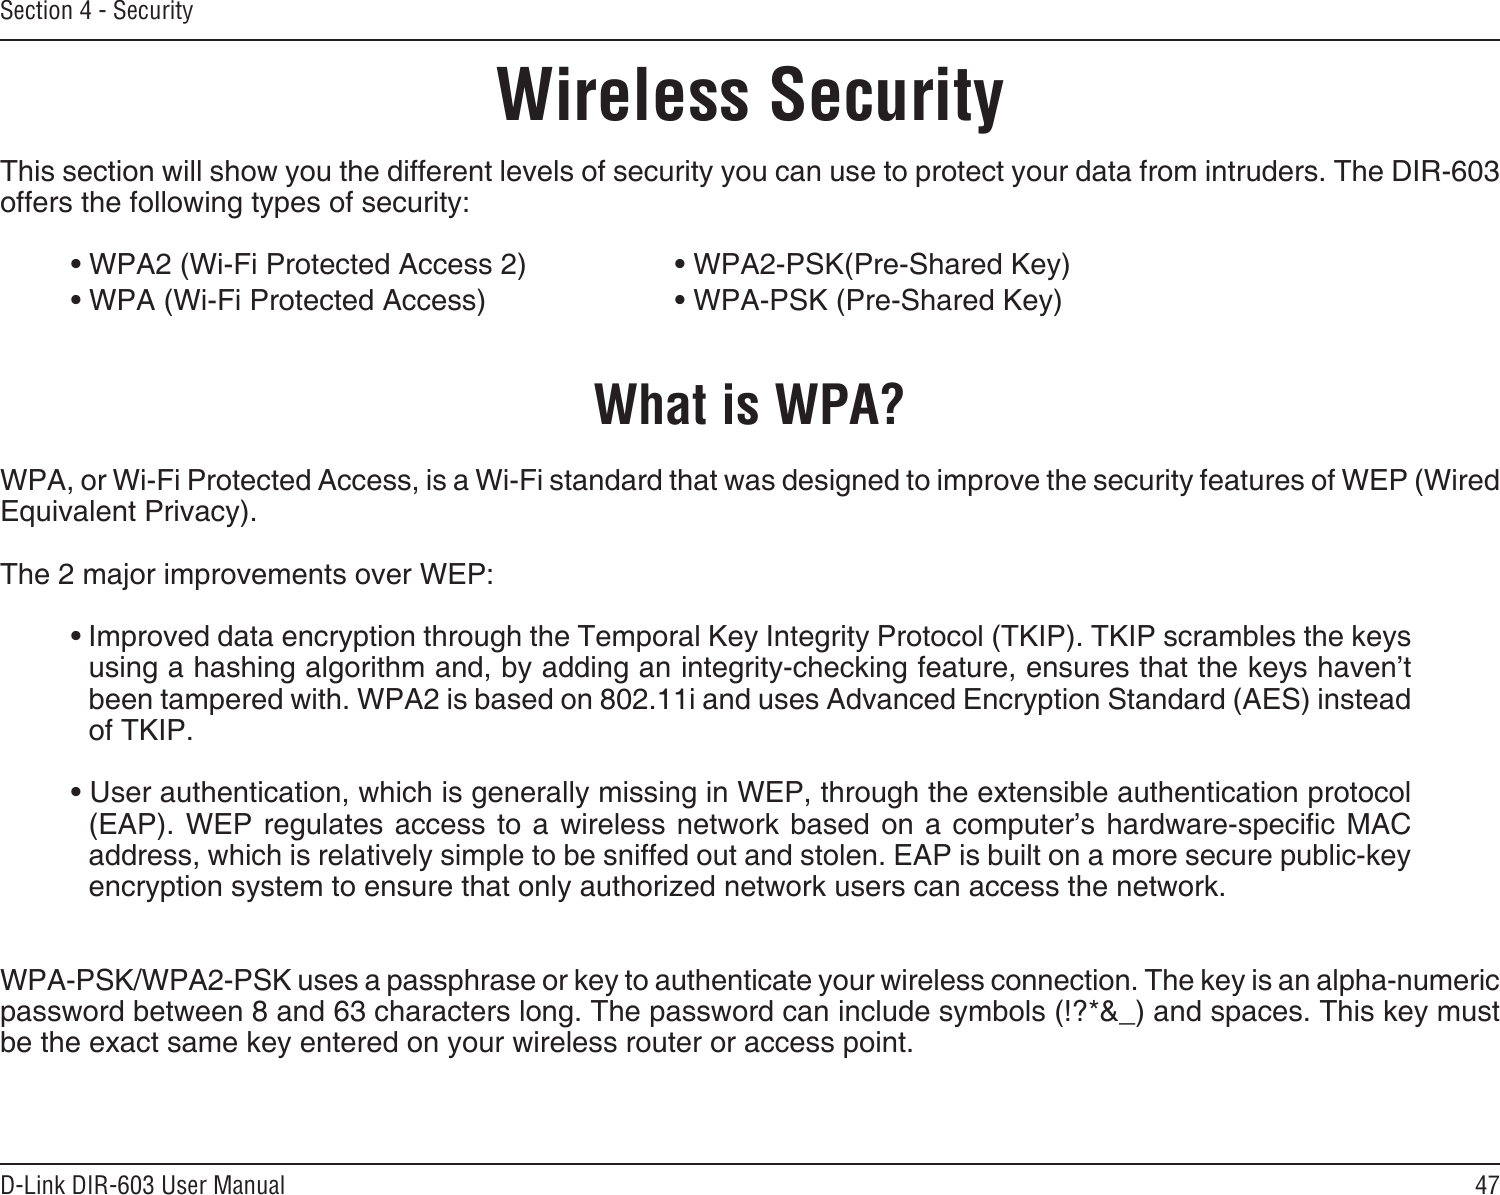 47D-Link DIR-603 User ManualSection 4 - SecurityWireless SecurityThis section will show you the different levels of security you can use to protect your data from intruders. The DIR-603 offers the following types of security:• WPA2 (Wi-Fi Protected Access 2)     • WPA2-PSK(Pre-Shared Key)• WPA (Wi-Fi Protected Access)      • WPA-PSK (Pre-Shared Key)What is WPA?WPA, or Wi-Fi Protected Access, is a Wi-Fi standard that was designed to improve the security features of WEP (Wired Equivalent Privacy).  The 2 major improvements over WEP: • Improved data encryption through the Temporal Key Integrity Protocol (TKIP). TKIP scrambles the keys using a hashing algorithm and, by adding an integrity-checking feature, ensures that the keys haven’t been tampered with. WPA2 is based on 802.11i and uses Advanced Encryption Standard (AES) instead of TKIP.• User authentication, which is generally missing in WEP, through the extensible authentication protocol (EAP). WEP regulates access  to  a wireless  network based on a computer’s  hardware-specic  MAC address, which is relatively simple to be sniffed out and stolen. EAP is built on a more secure public-key encryption system to ensure that only authorized network users can access the network.WPA-PSK/WPA2-PSK uses a passphrase or key to authenticate your wireless connection. The key is an alpha-numeric password between 8 and 63 characters long. The password can include symbols (!?*&amp;_) and spaces. This key must be the exact same key entered on your wireless router or access point.